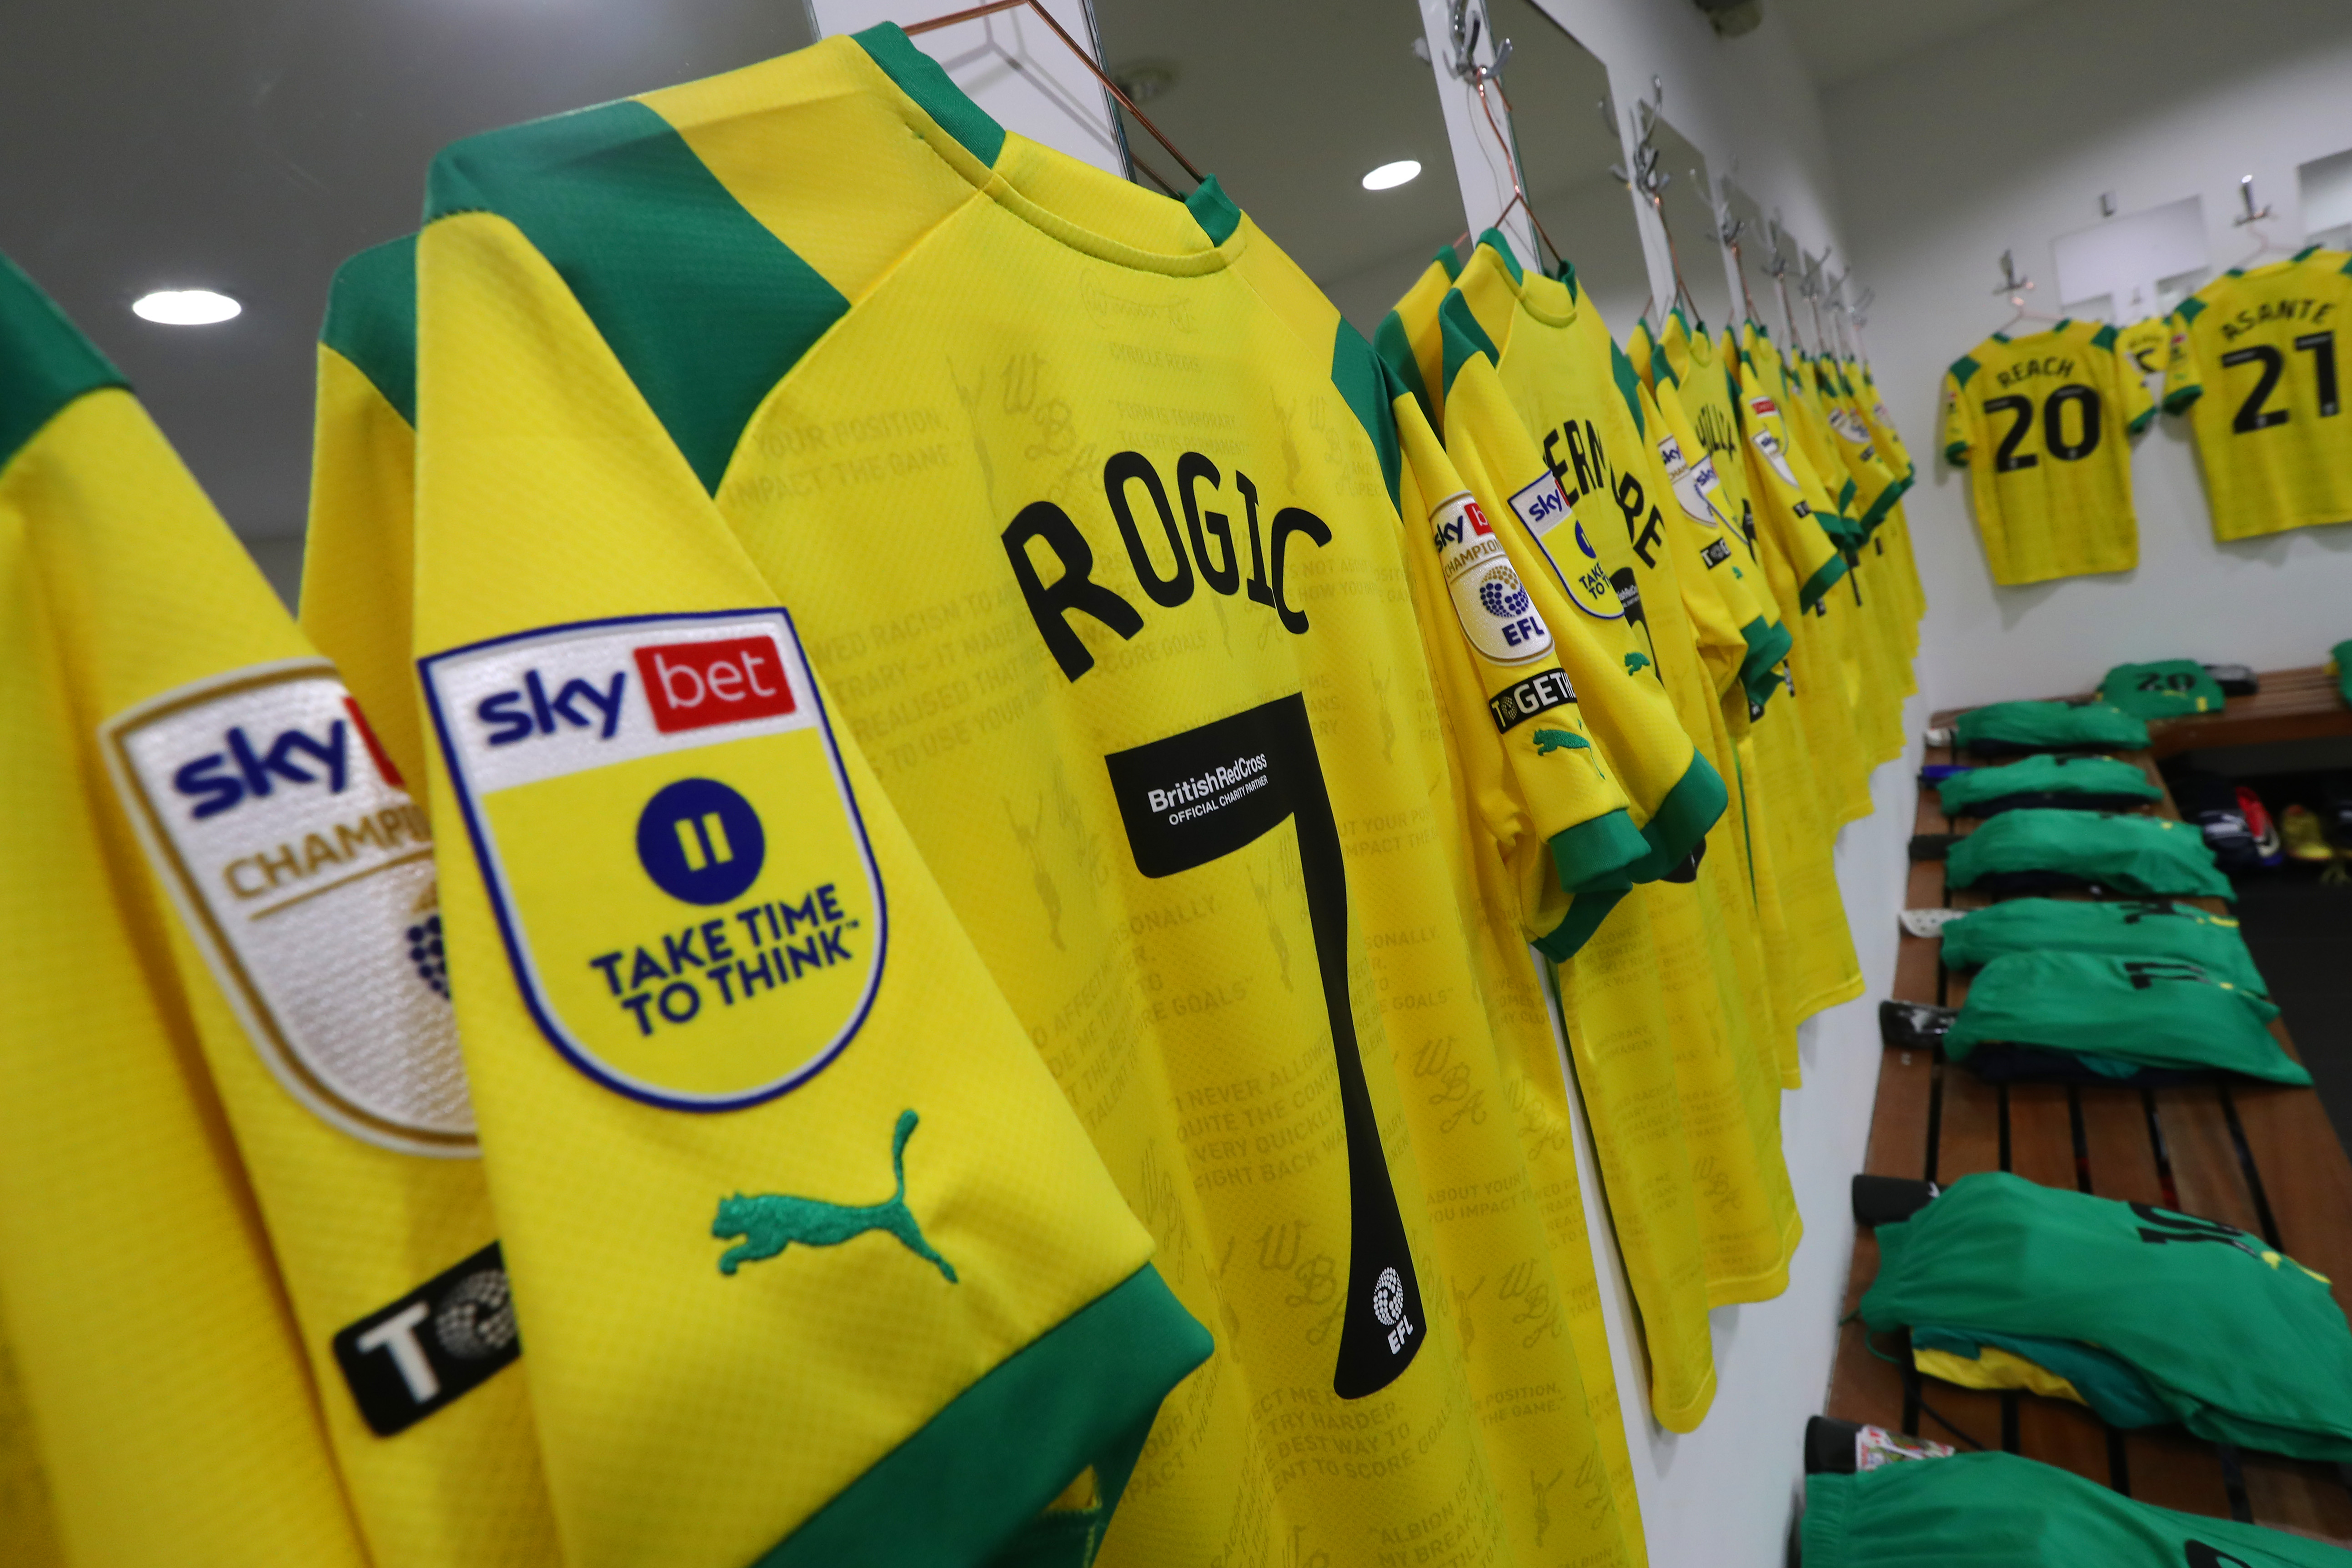 Tom Rogic's away shirt hanging in the dressing room.